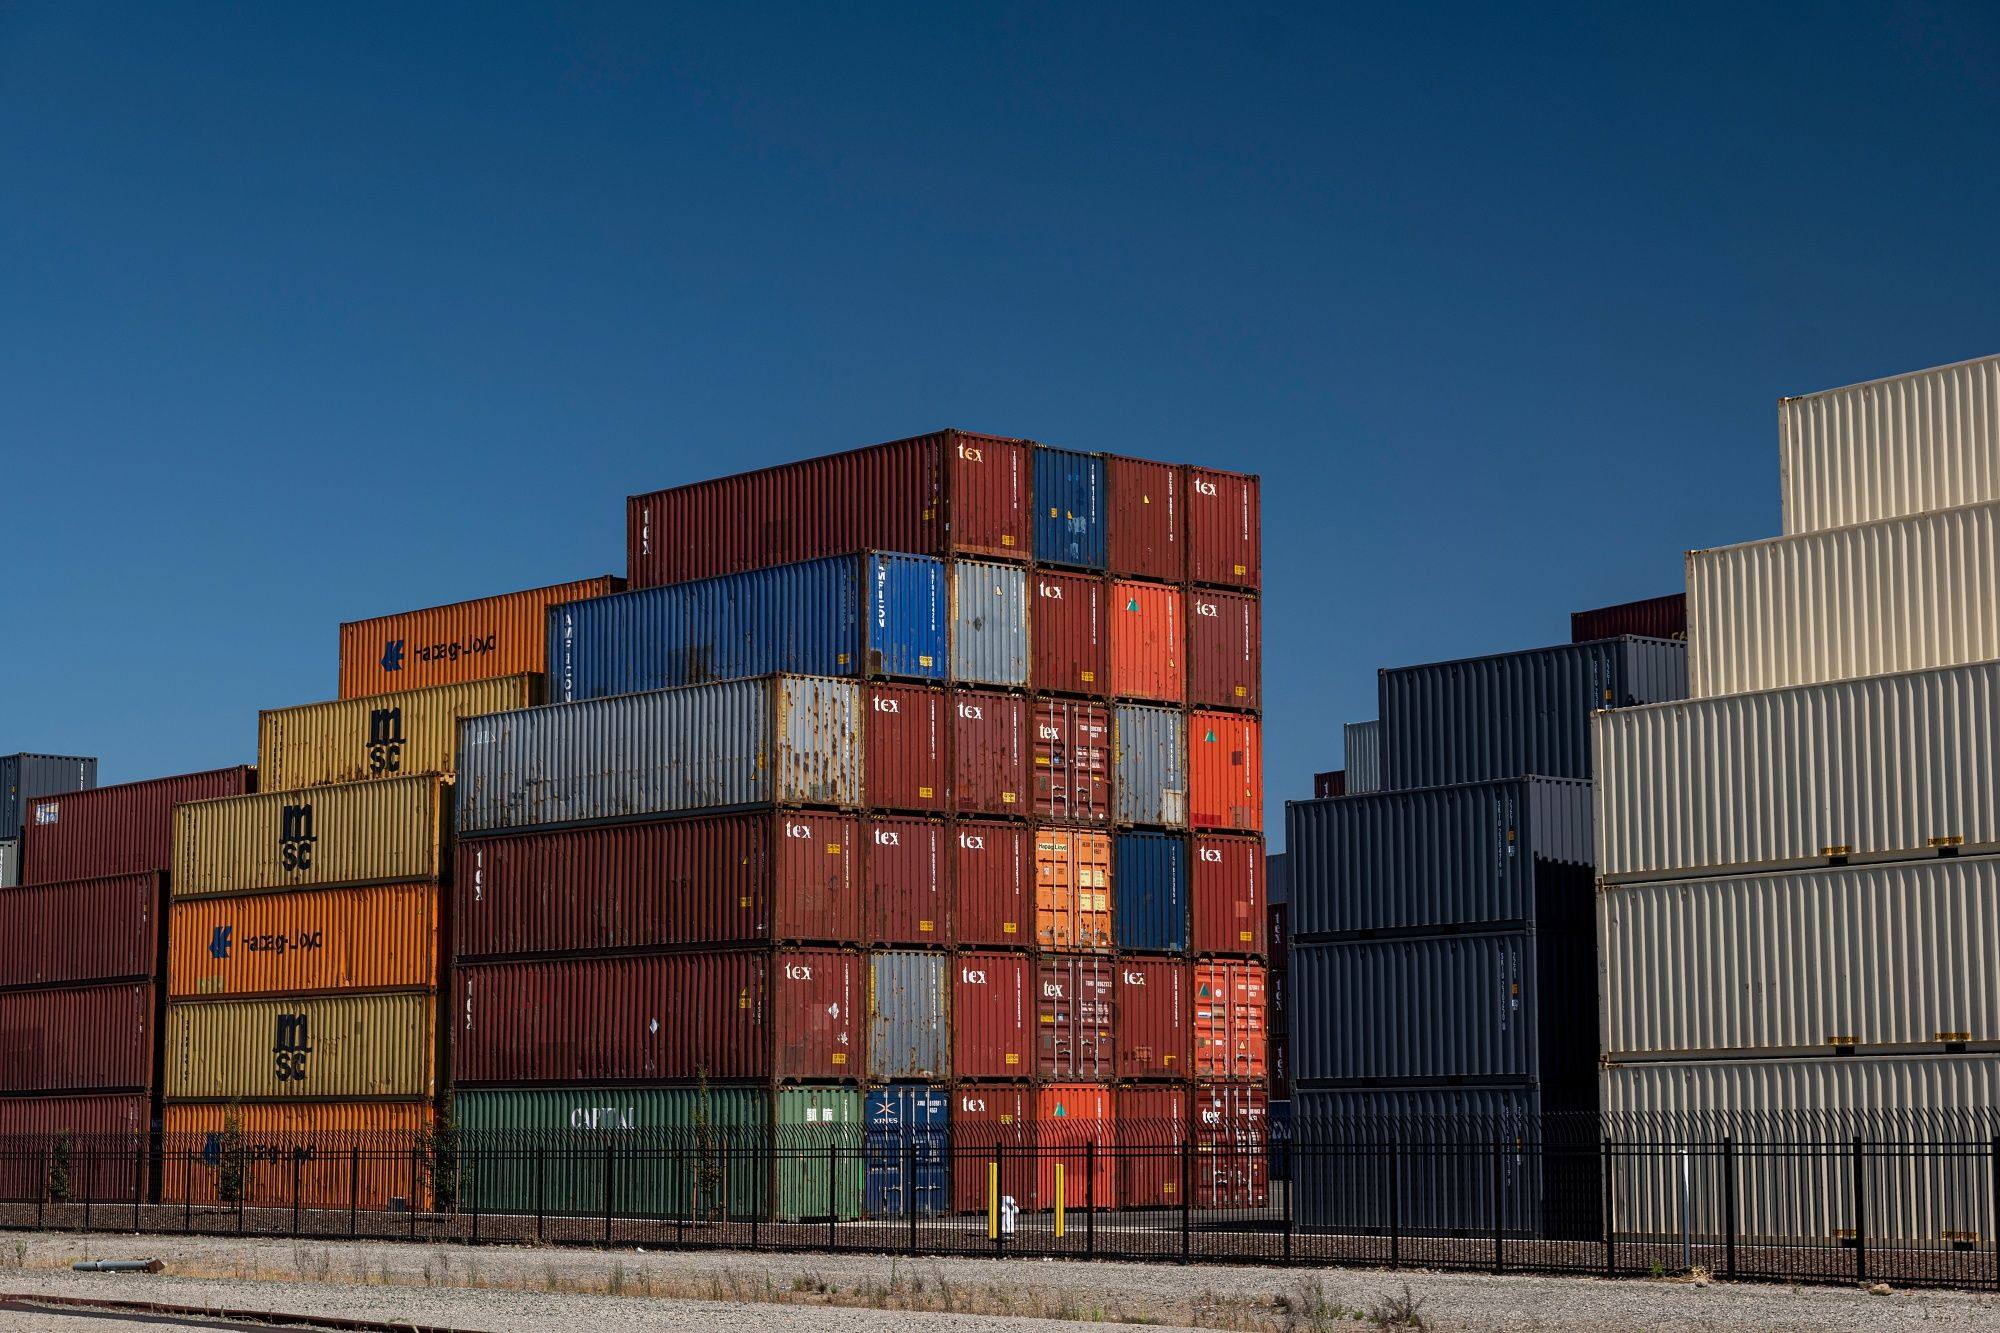 Shipping containers at the Port of Oakland in California, US, on July 14. Worker disputes at major US ports are weighing on already-stressed supply chains. Photo: Bloomberg